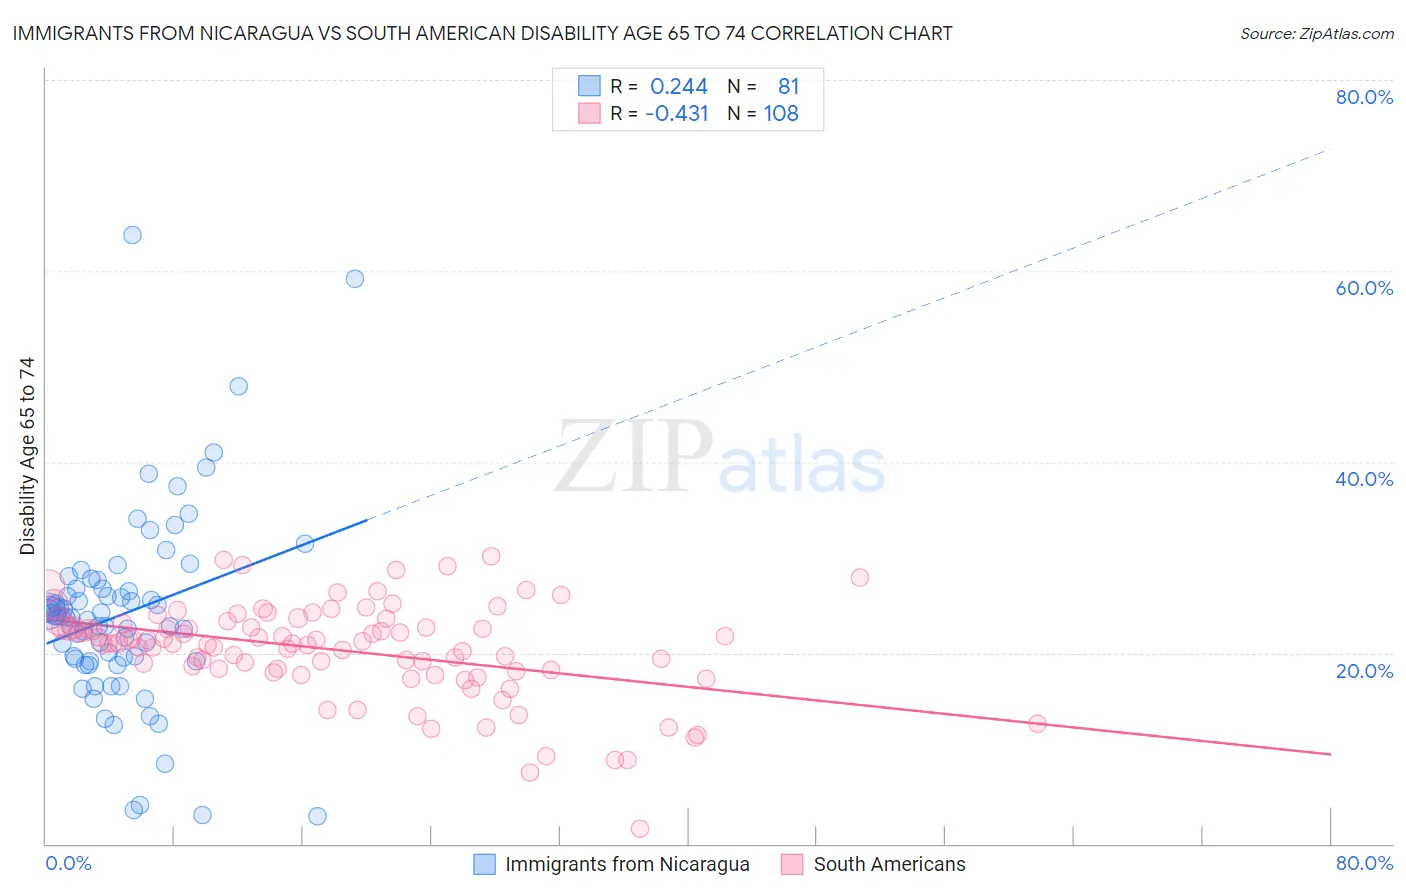 Immigrants from Nicaragua vs South American Disability Age 65 to 74